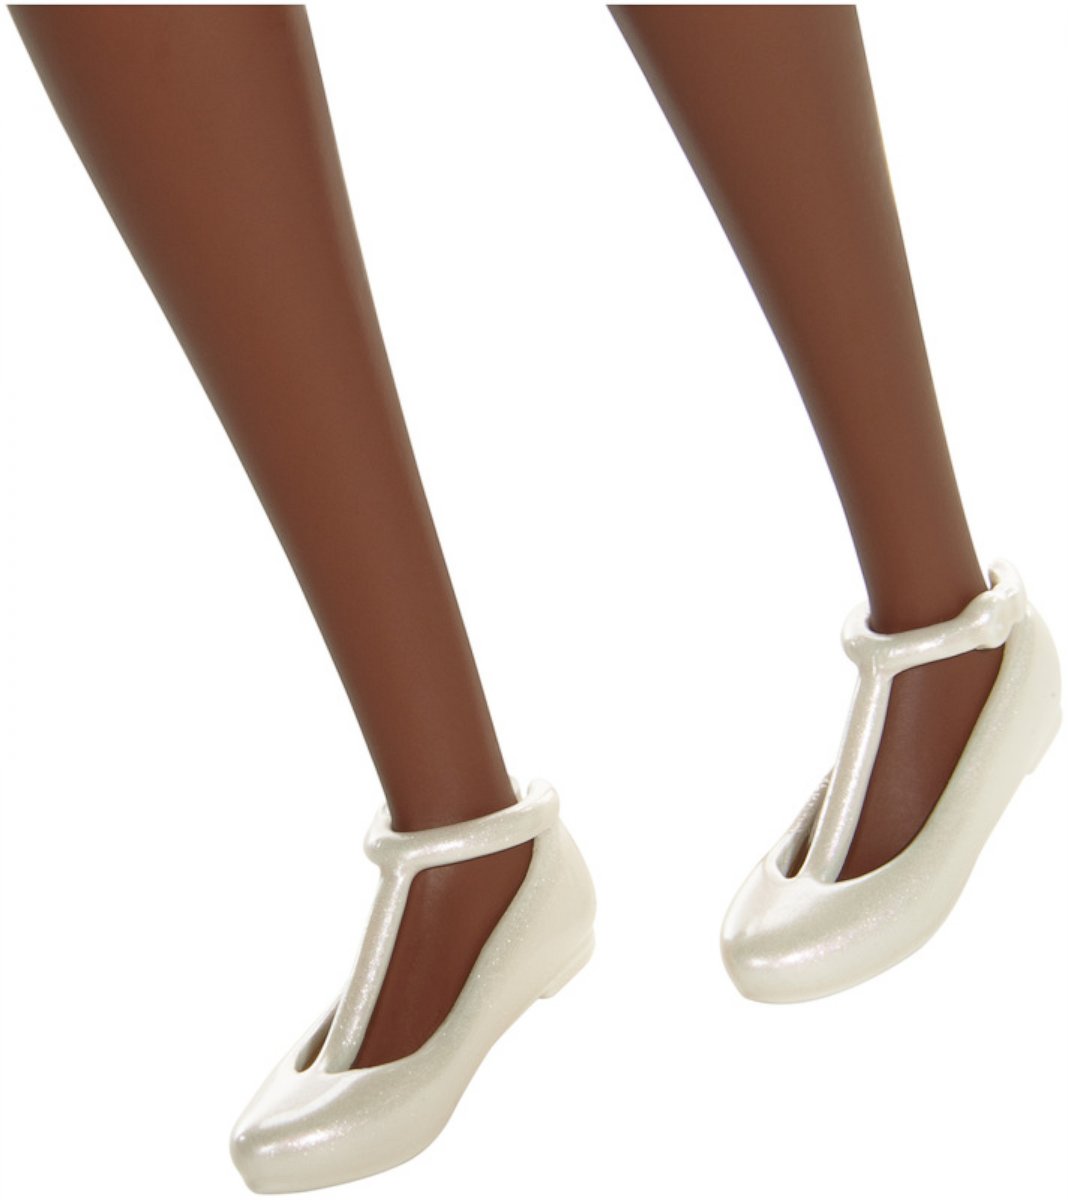 PHOTO: With movable ankles, Barbie can now wear flats. 